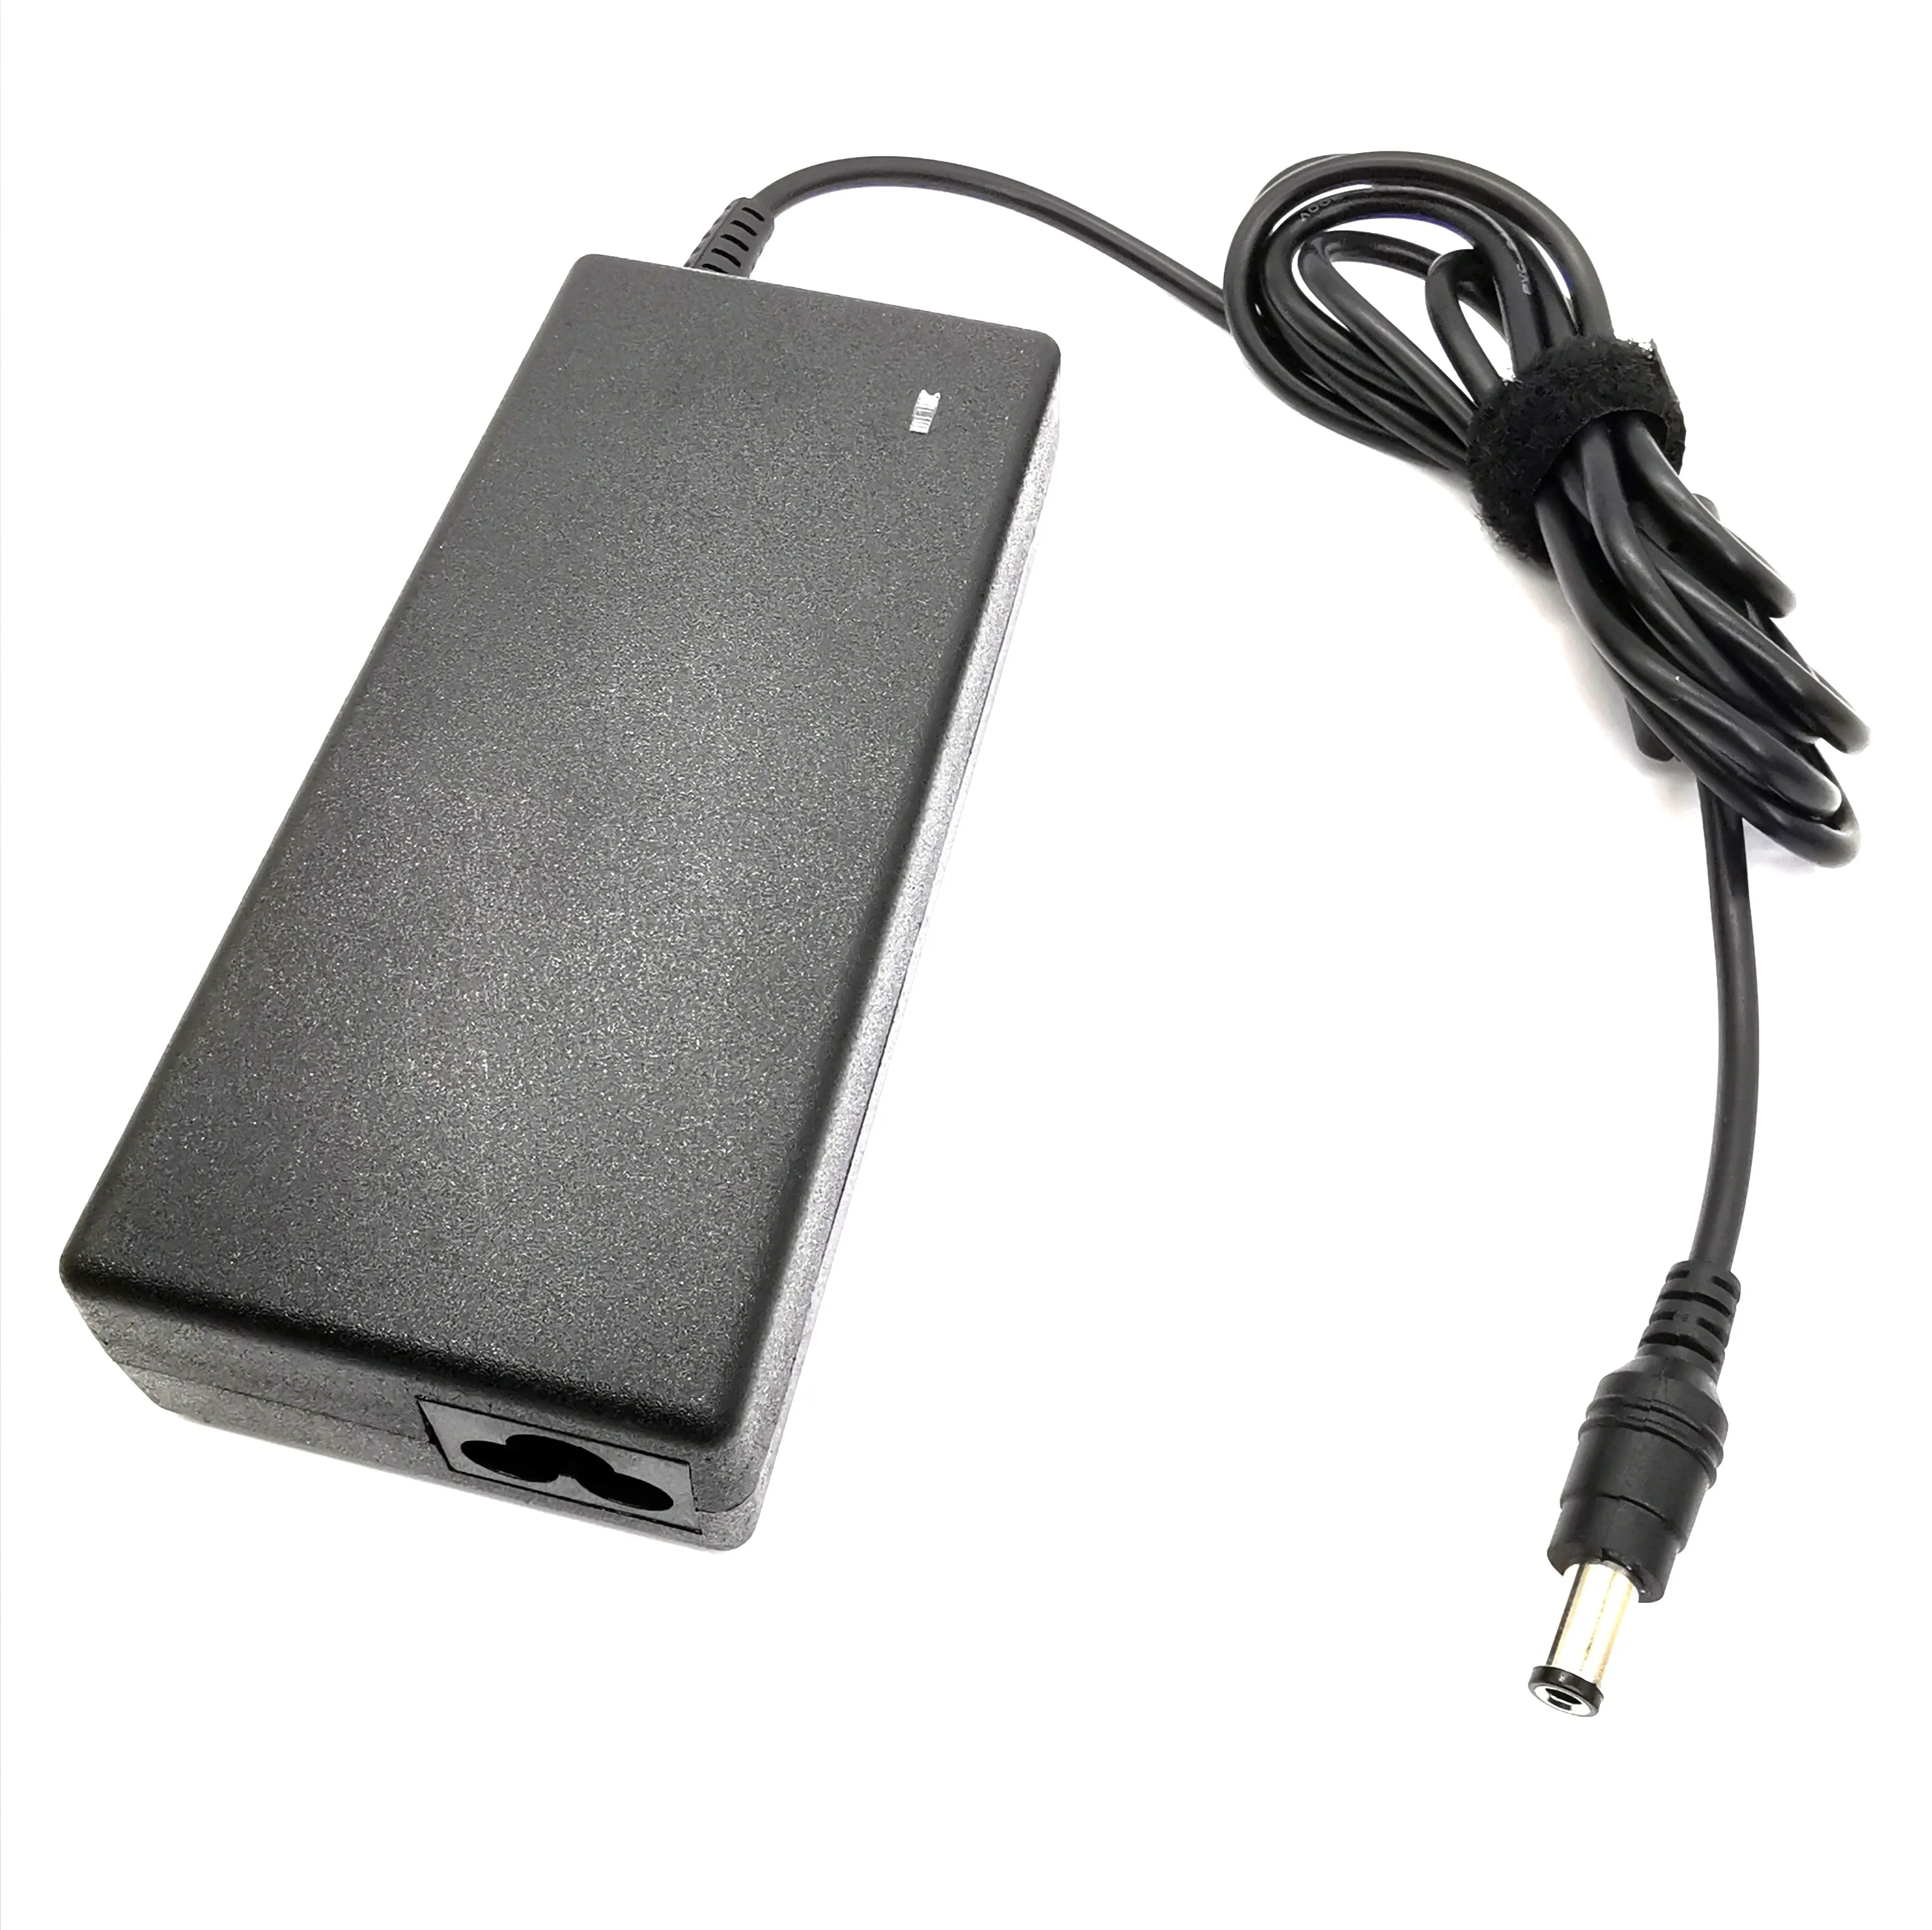 Ac/dc Power Adapter 90w 15v 6a * Mm Laptop Charger For Toshiba Qosmio  Series E10 E15 F10 F20 F25 - Buy 15v Power Adapter/ Ac Dc Adapter,15v6a  Ac/dc Power Adapter,Power Adapter For